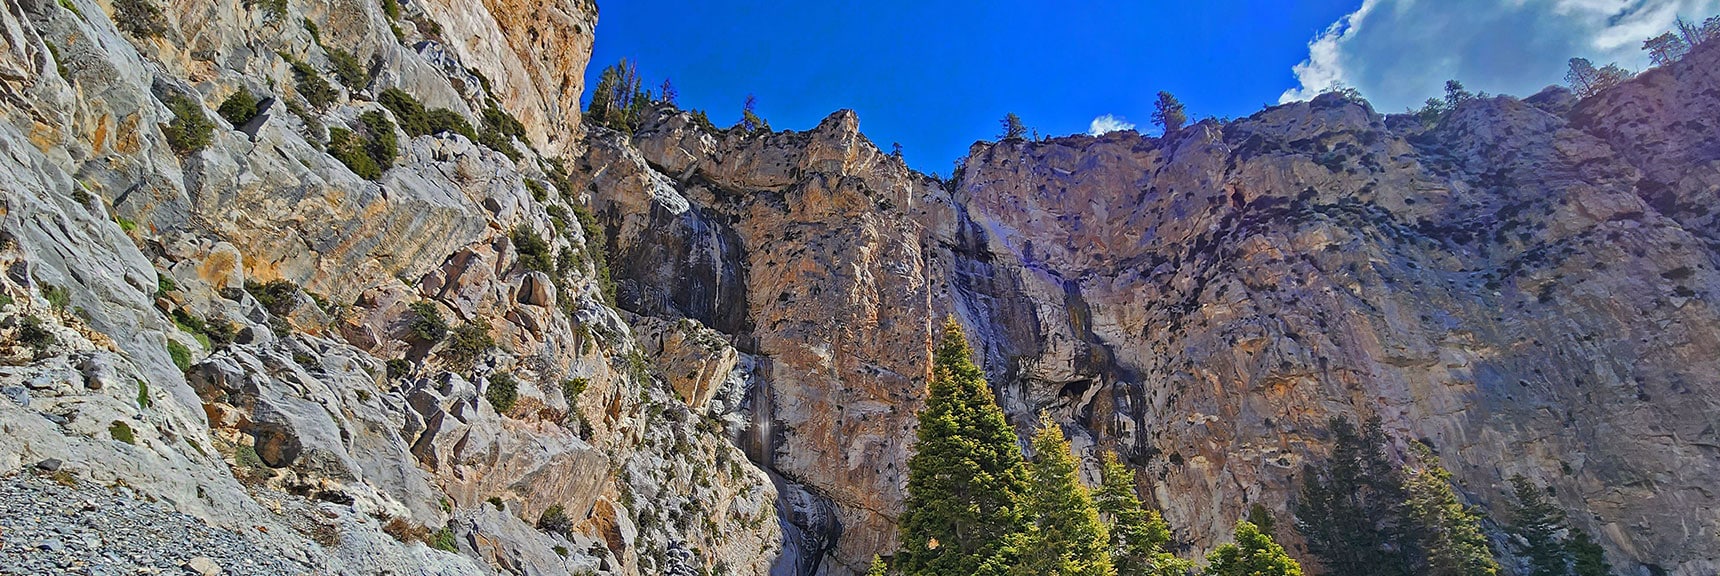 Falls Viewed from Near the Cave | Mary Jane Falls | Mt. Charleston Wilderness | Spring Mountains, Nevada